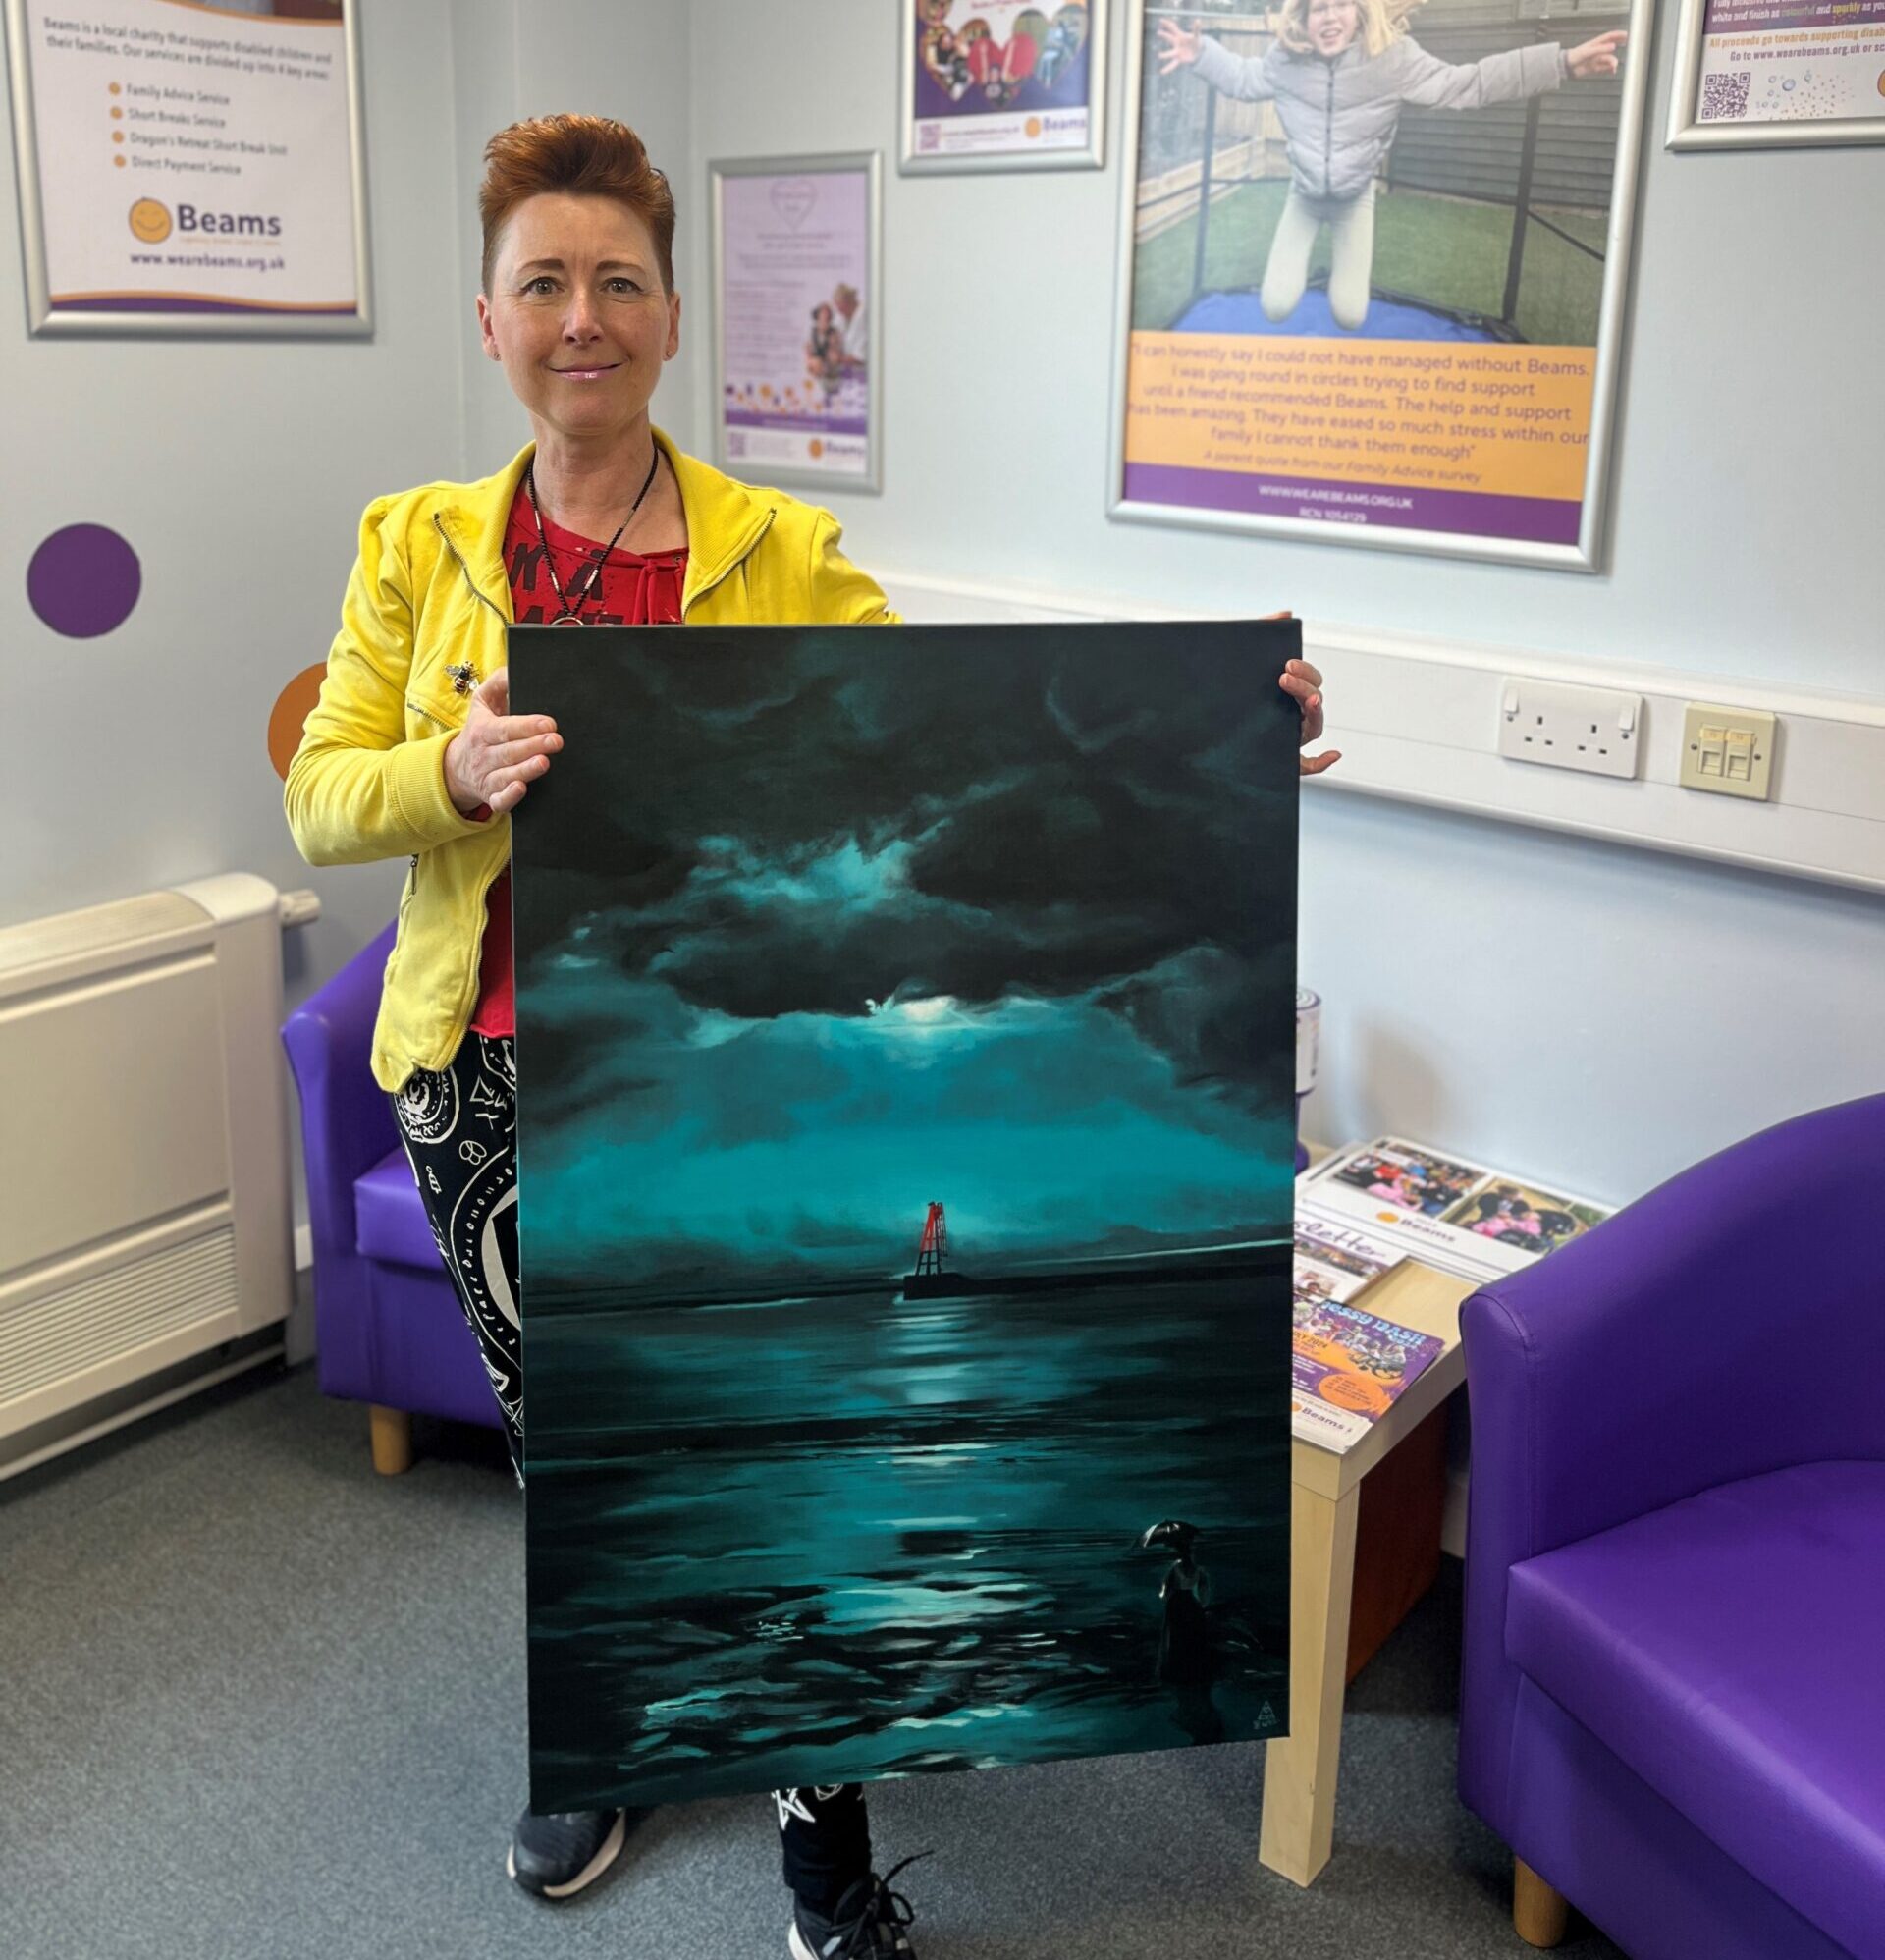 Artist Anna-Marie Buss donating a piece of artwork for the auction raising funds for disabled children, we are beams